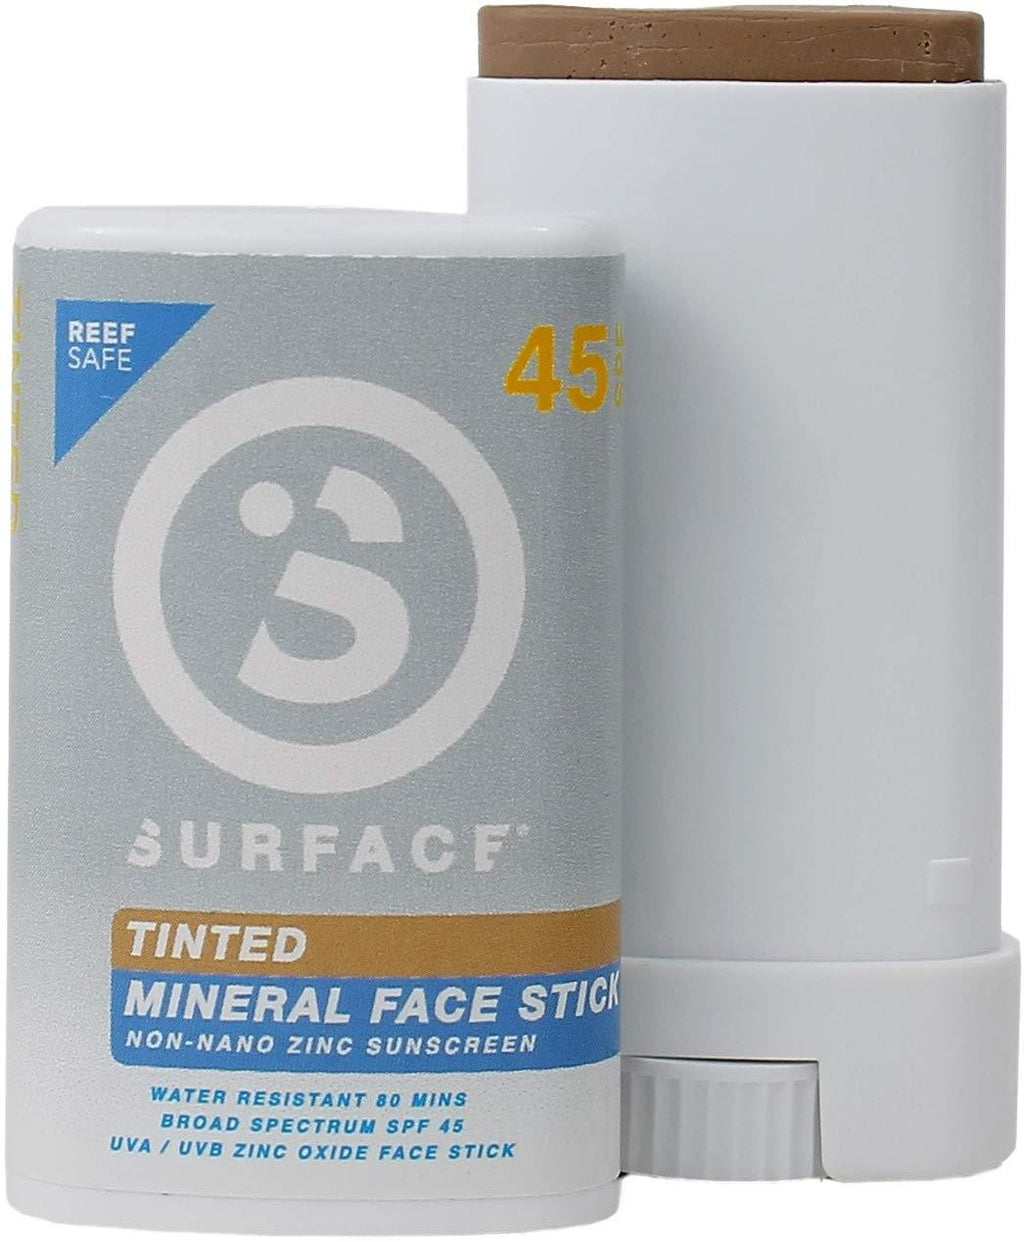 [Australia] - Surface Tinted Mineral Face Sunscreen Stick - Reef Safe, Broad Spectrum UVA/UVB Protection, Non-Migrating, Non-Greasy, Ultra Water Resistant - SPF 45, 0.5oz 0.5 Ounce (Pack of 1) 